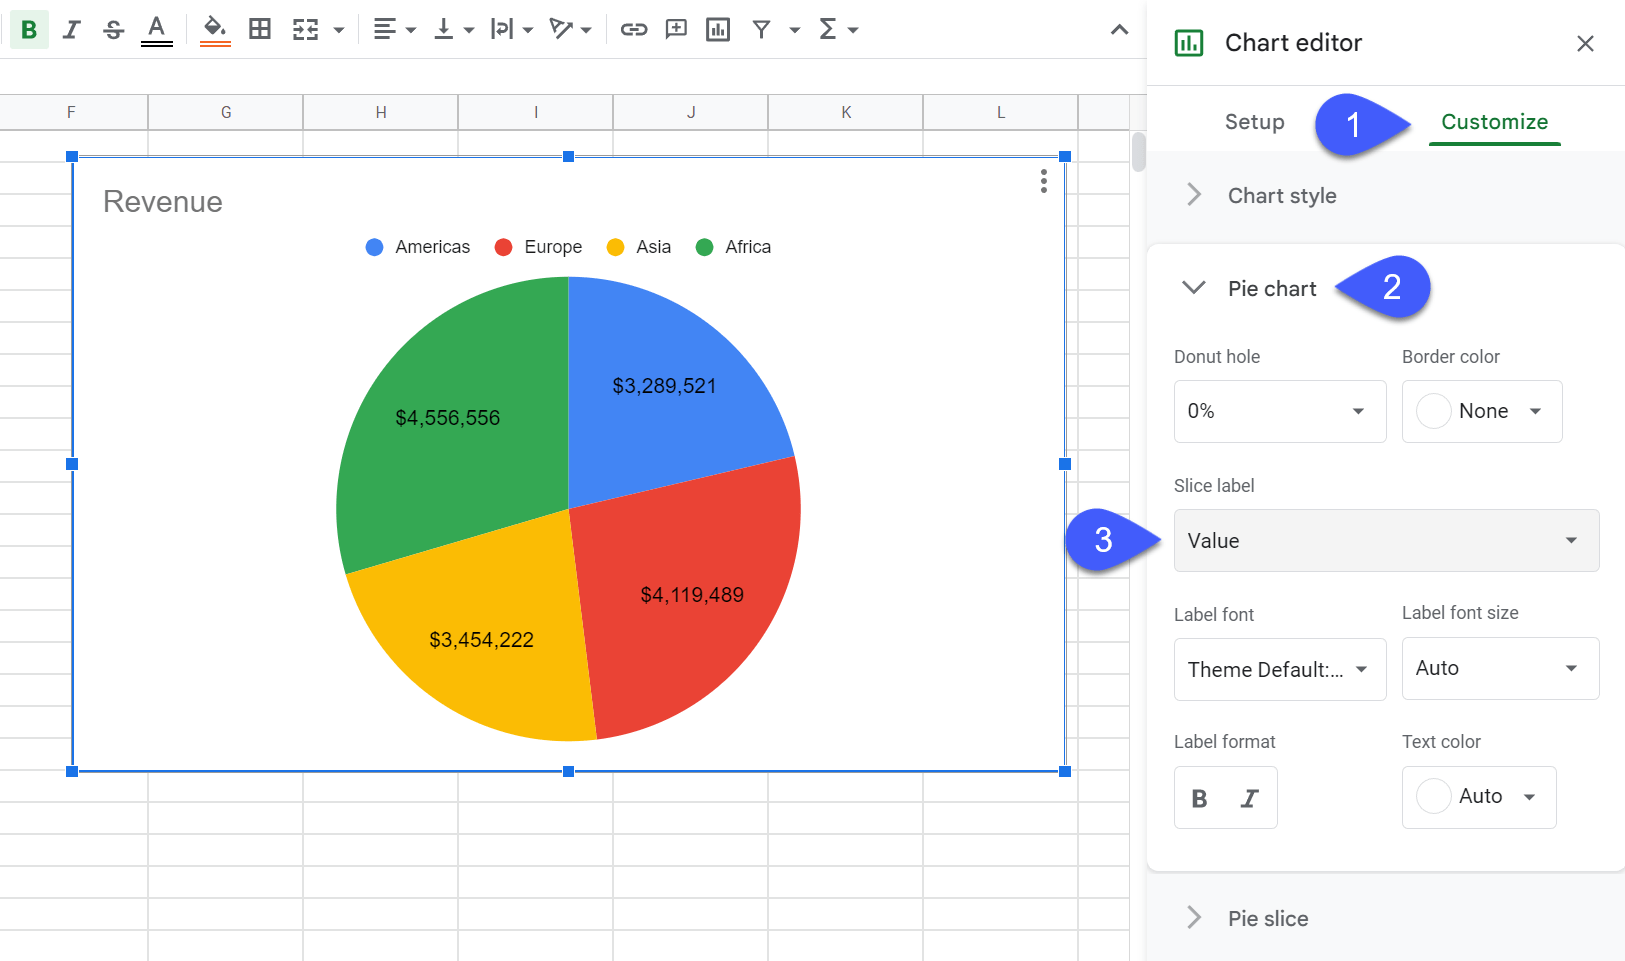 Create Custom Pie Chart Slice Labels with Absolute Values